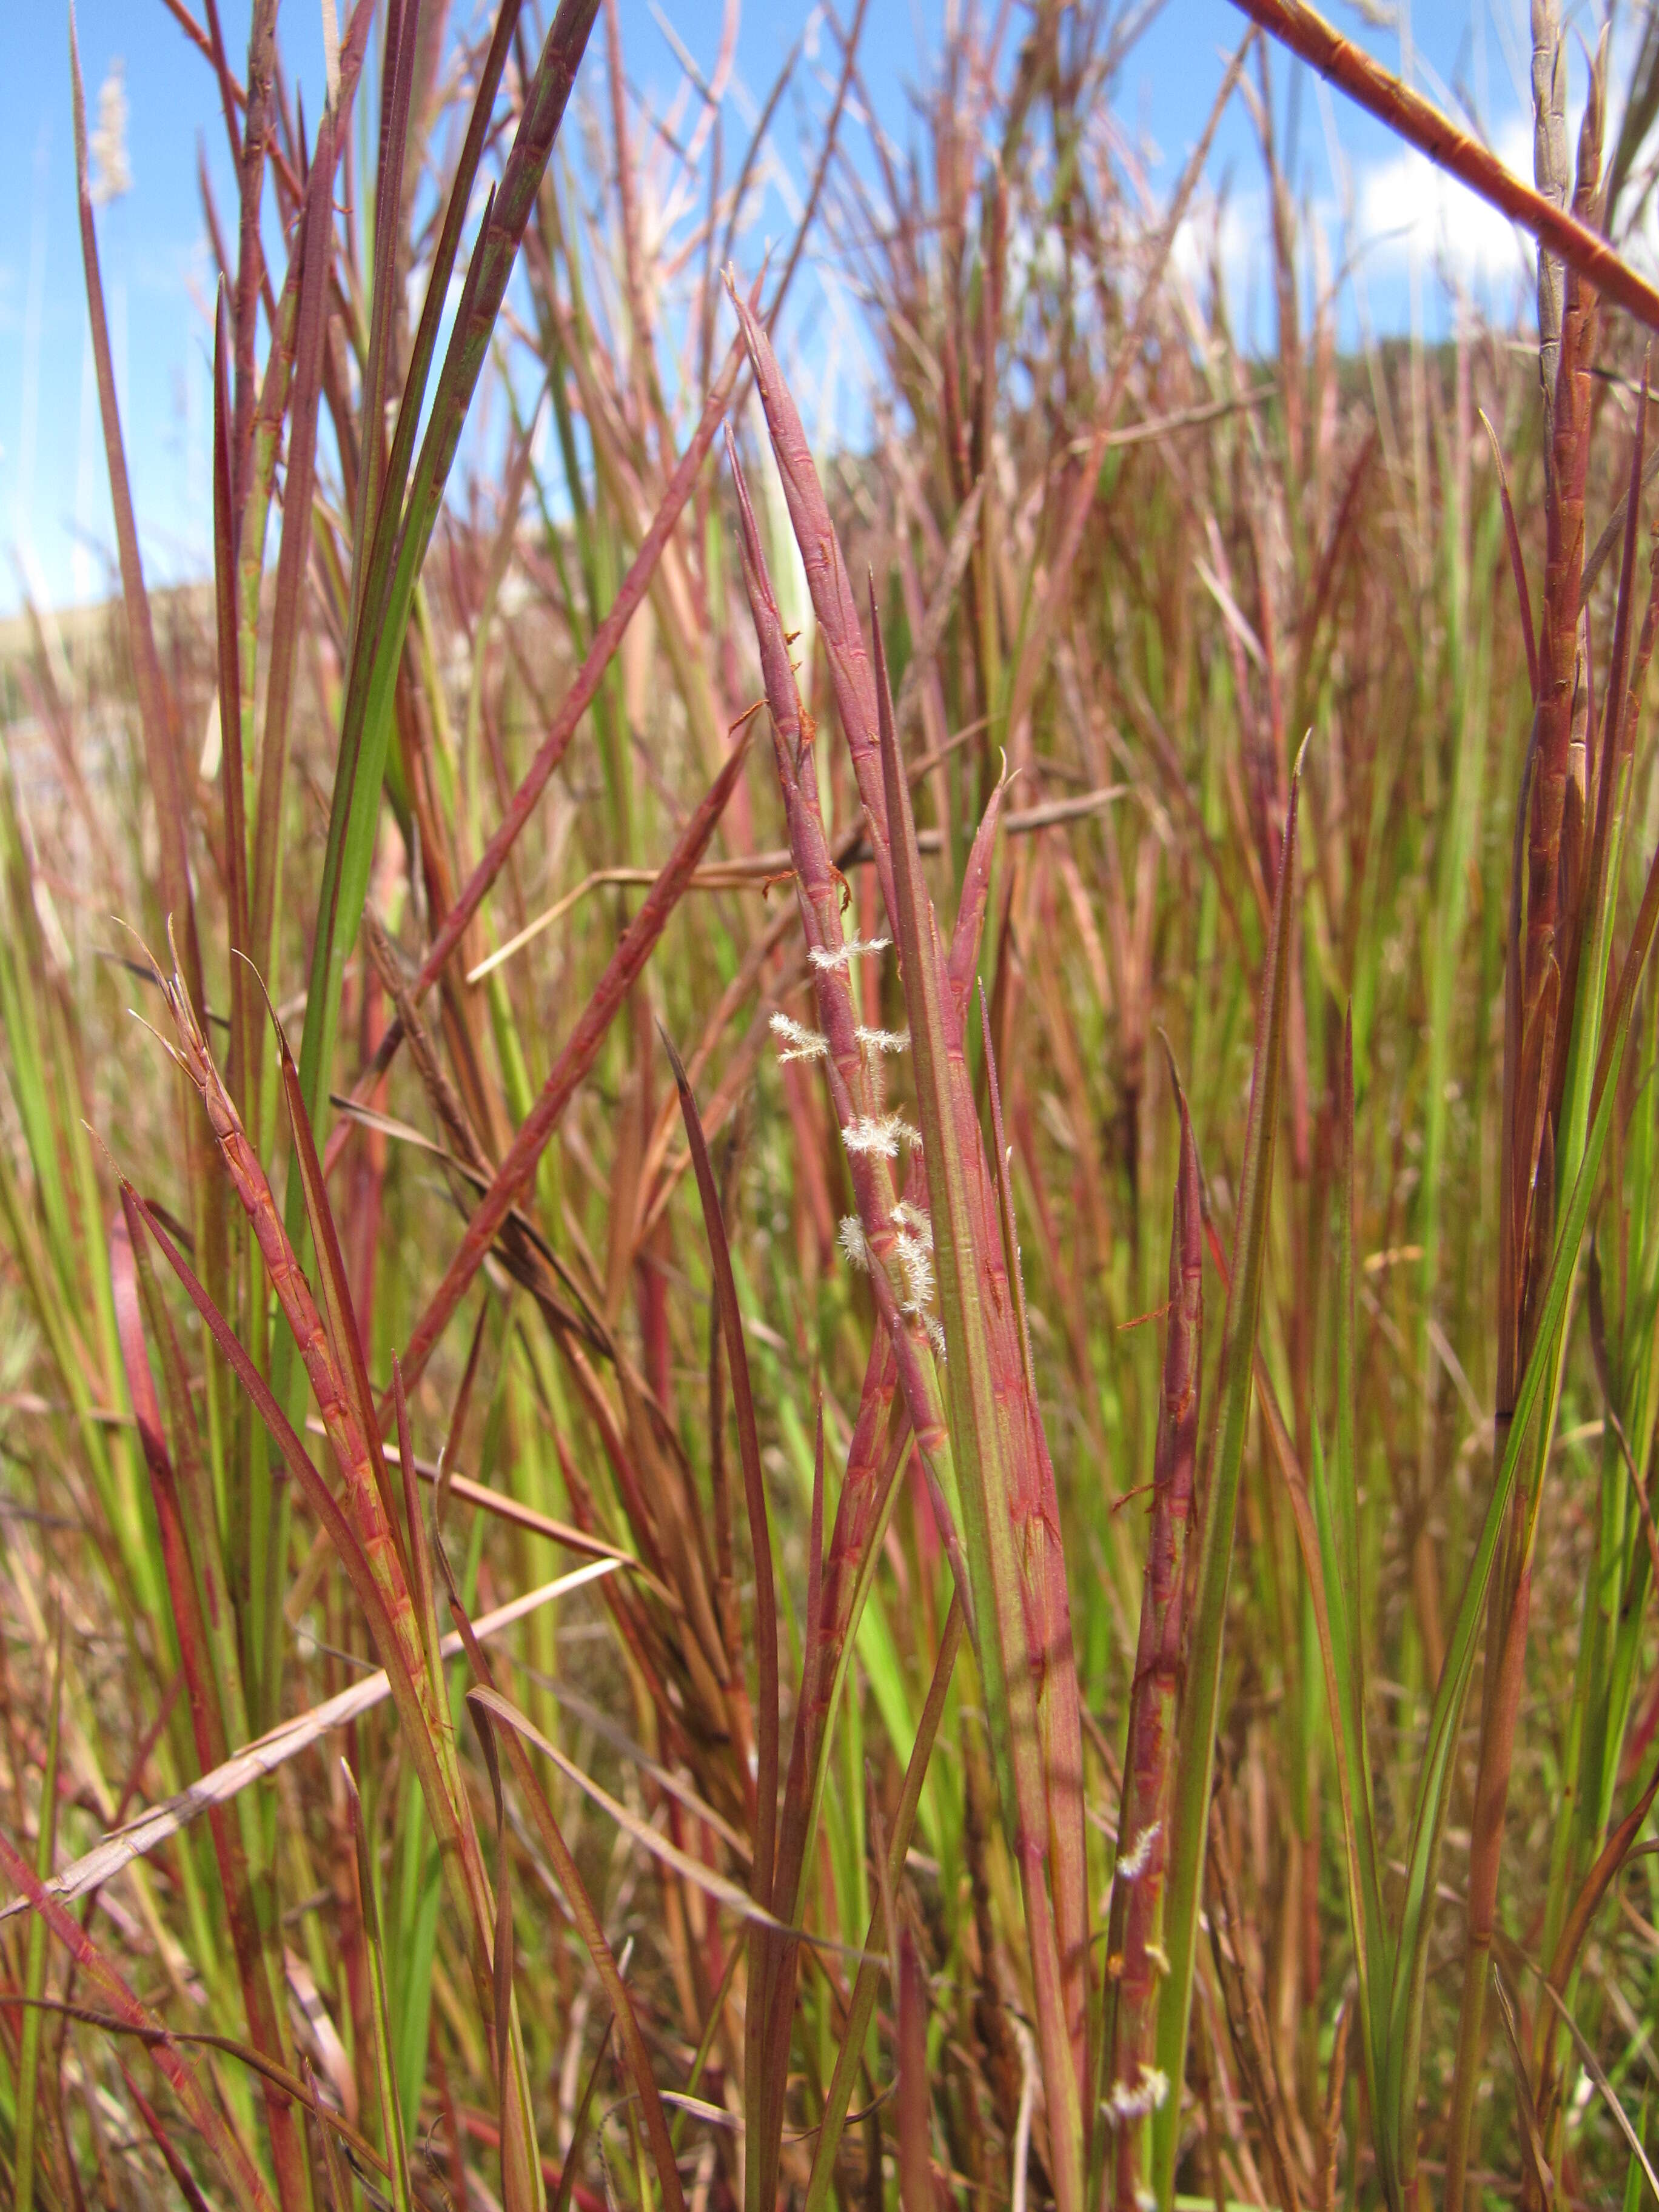 Image of limpograss